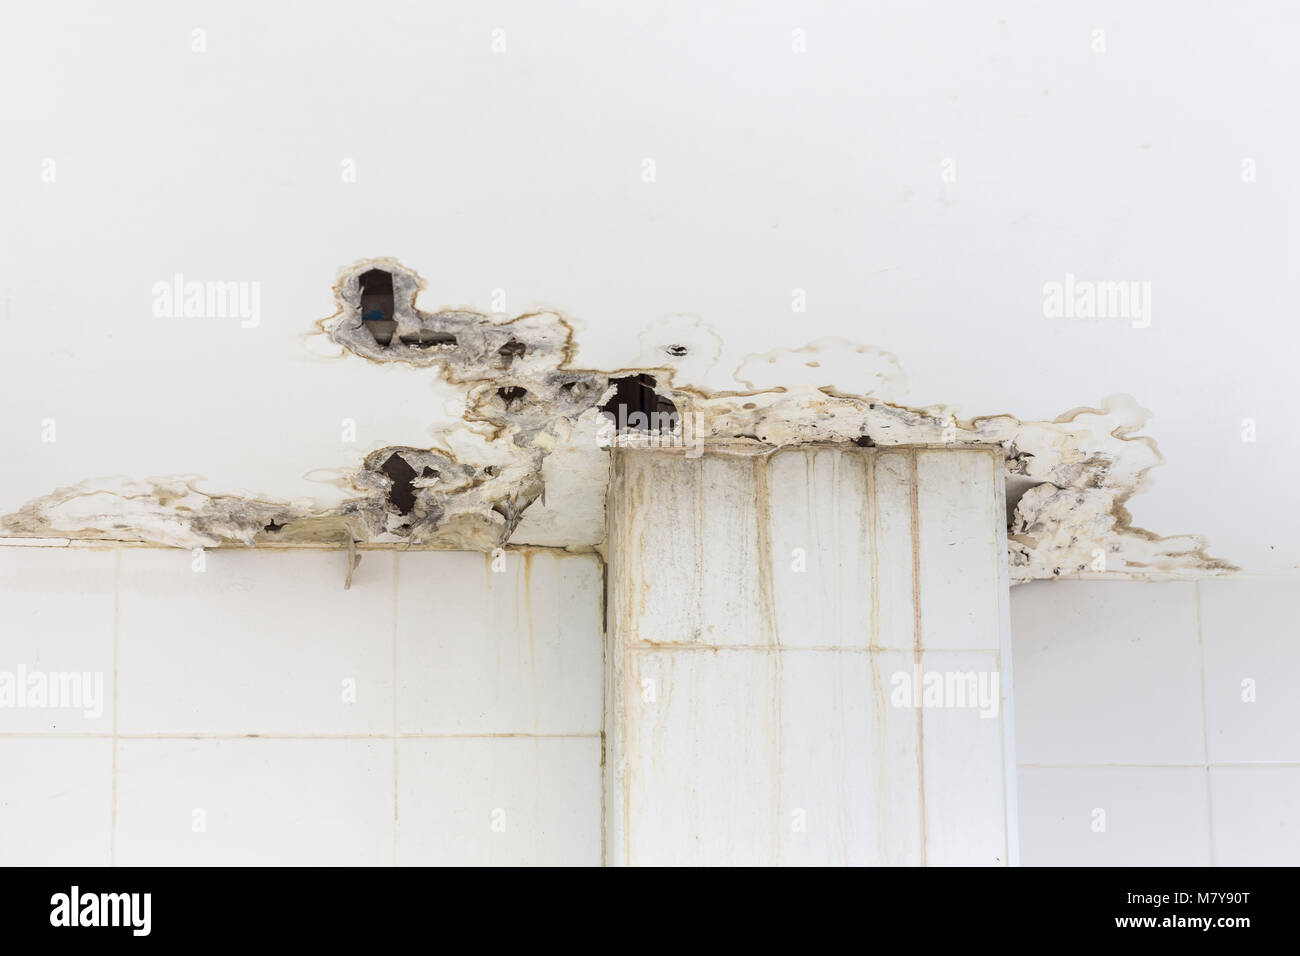 White Ceiling Inside The Building Get Damaged Showing Moisture And